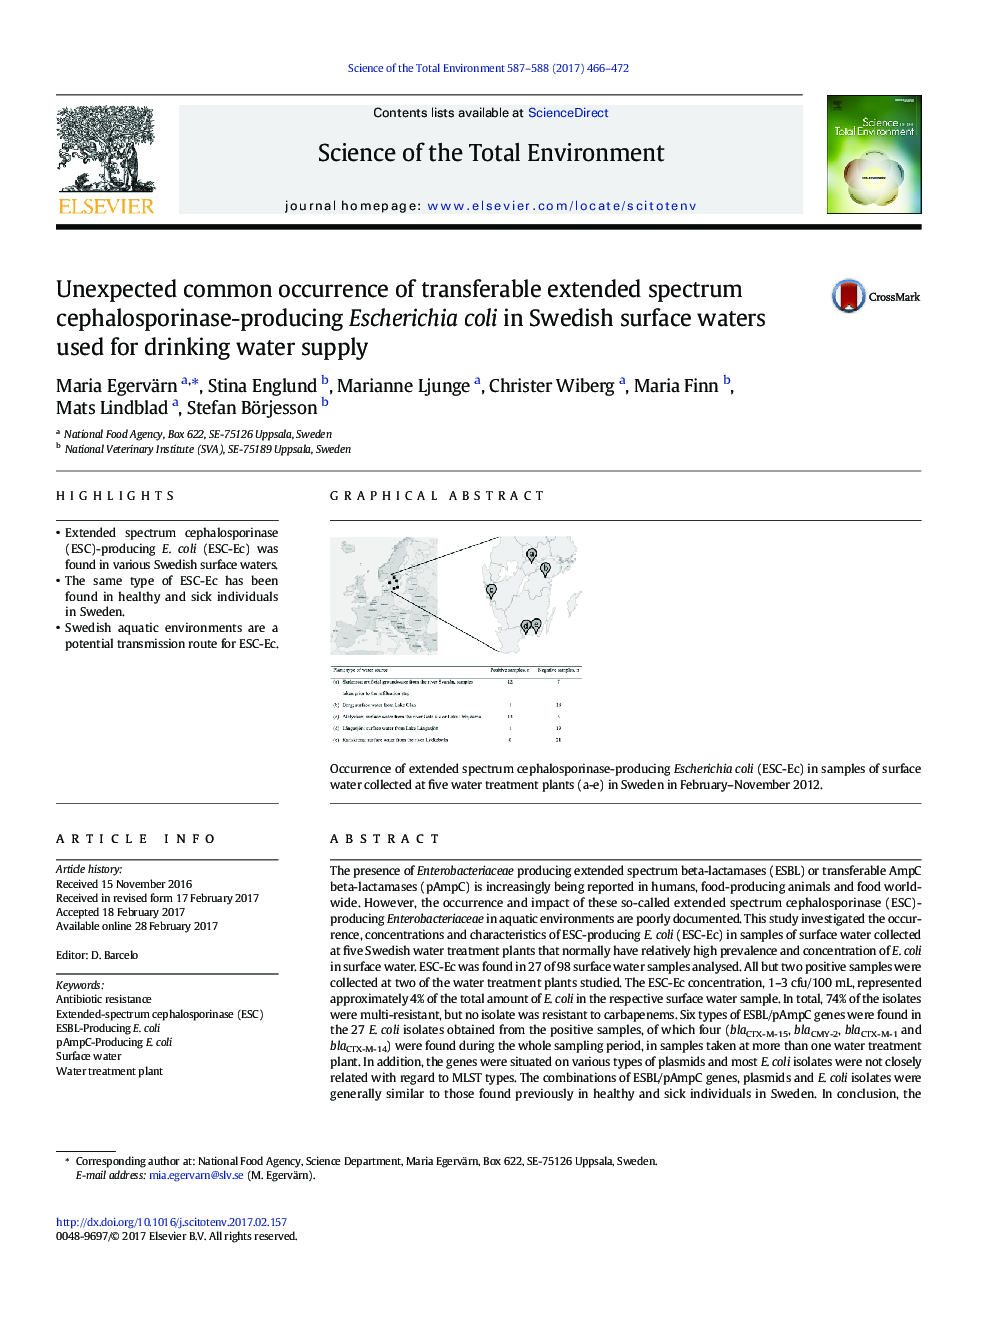 Unexpected common occurrence of transferable extended spectrum cephalosporinase-producing Escherichia coli in Swedish surface waters used for drinking water supply